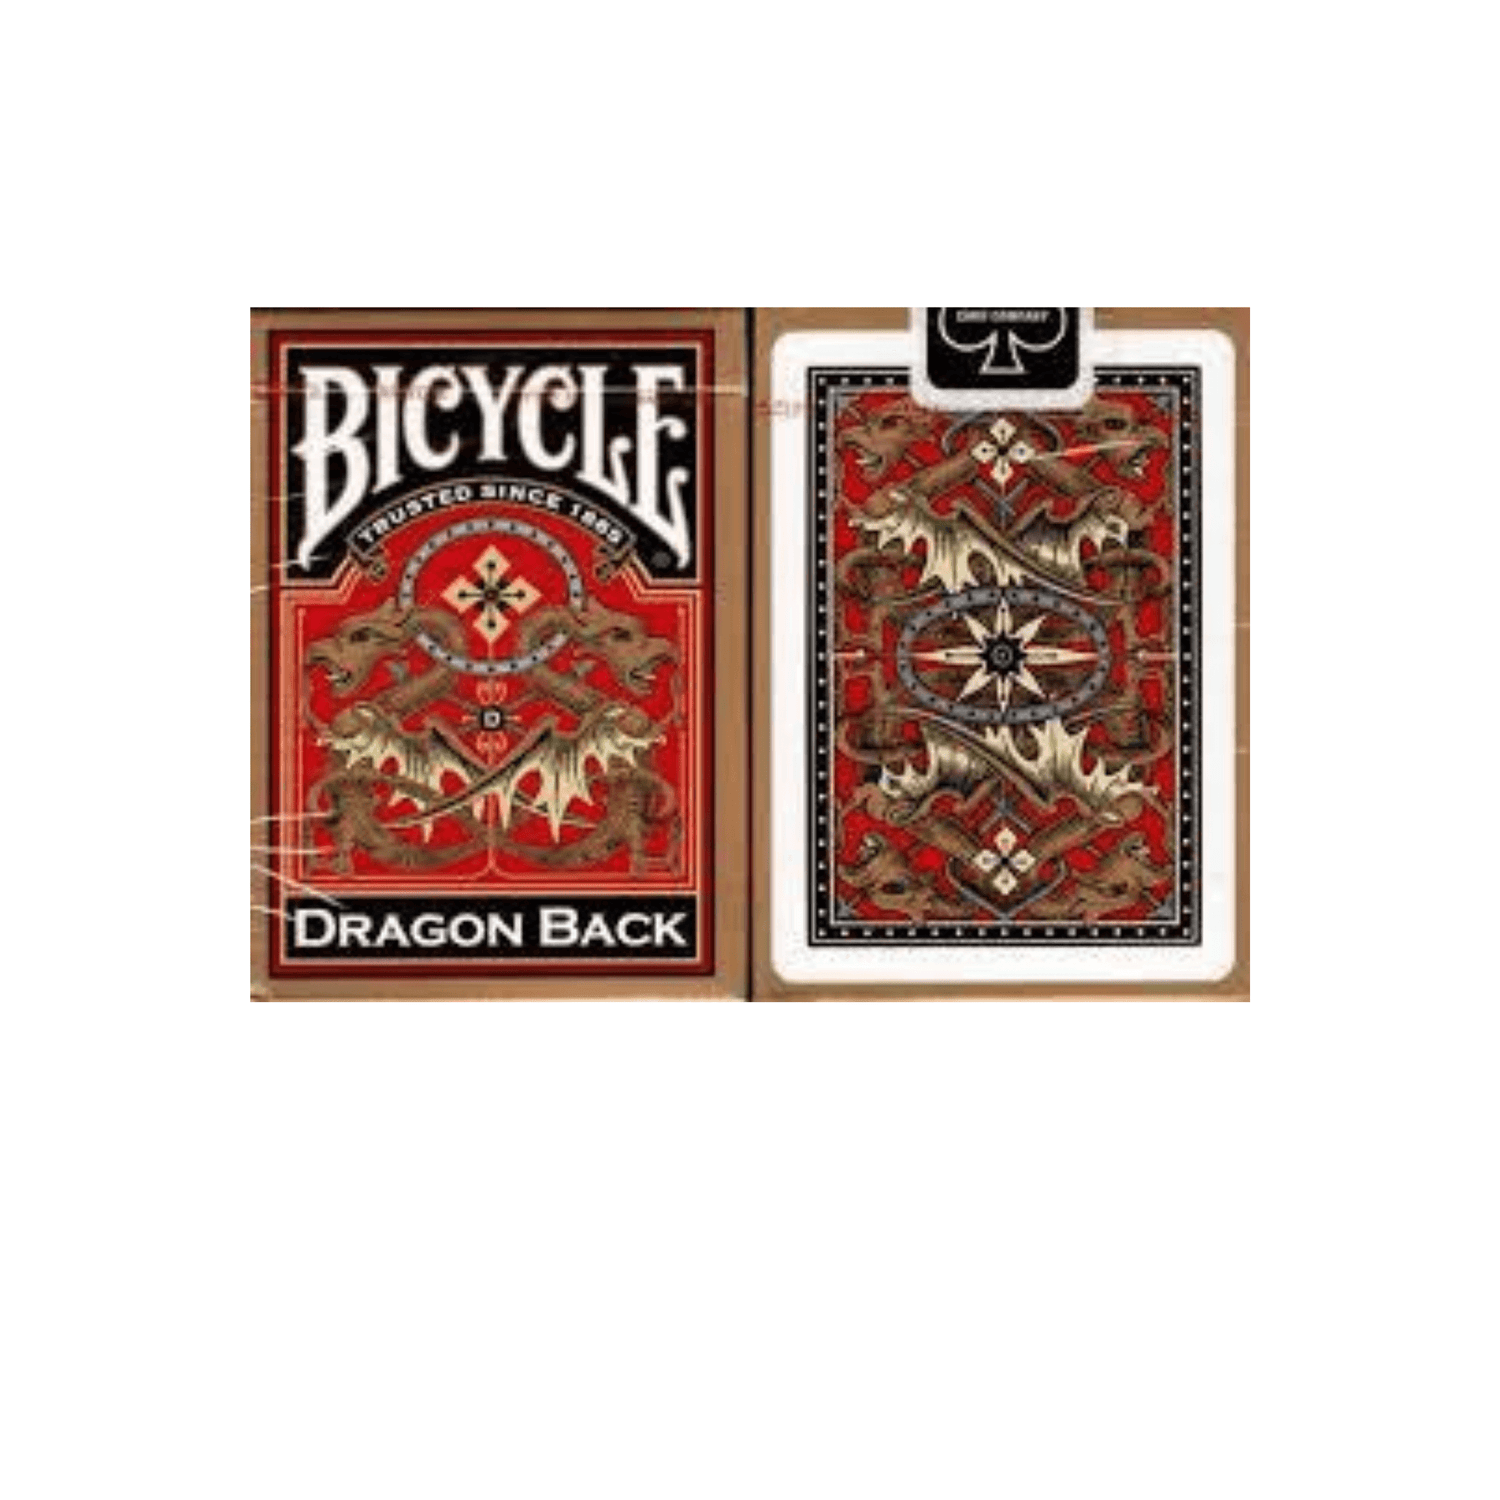 Bicycle dragon gold - Art Move Store Oy